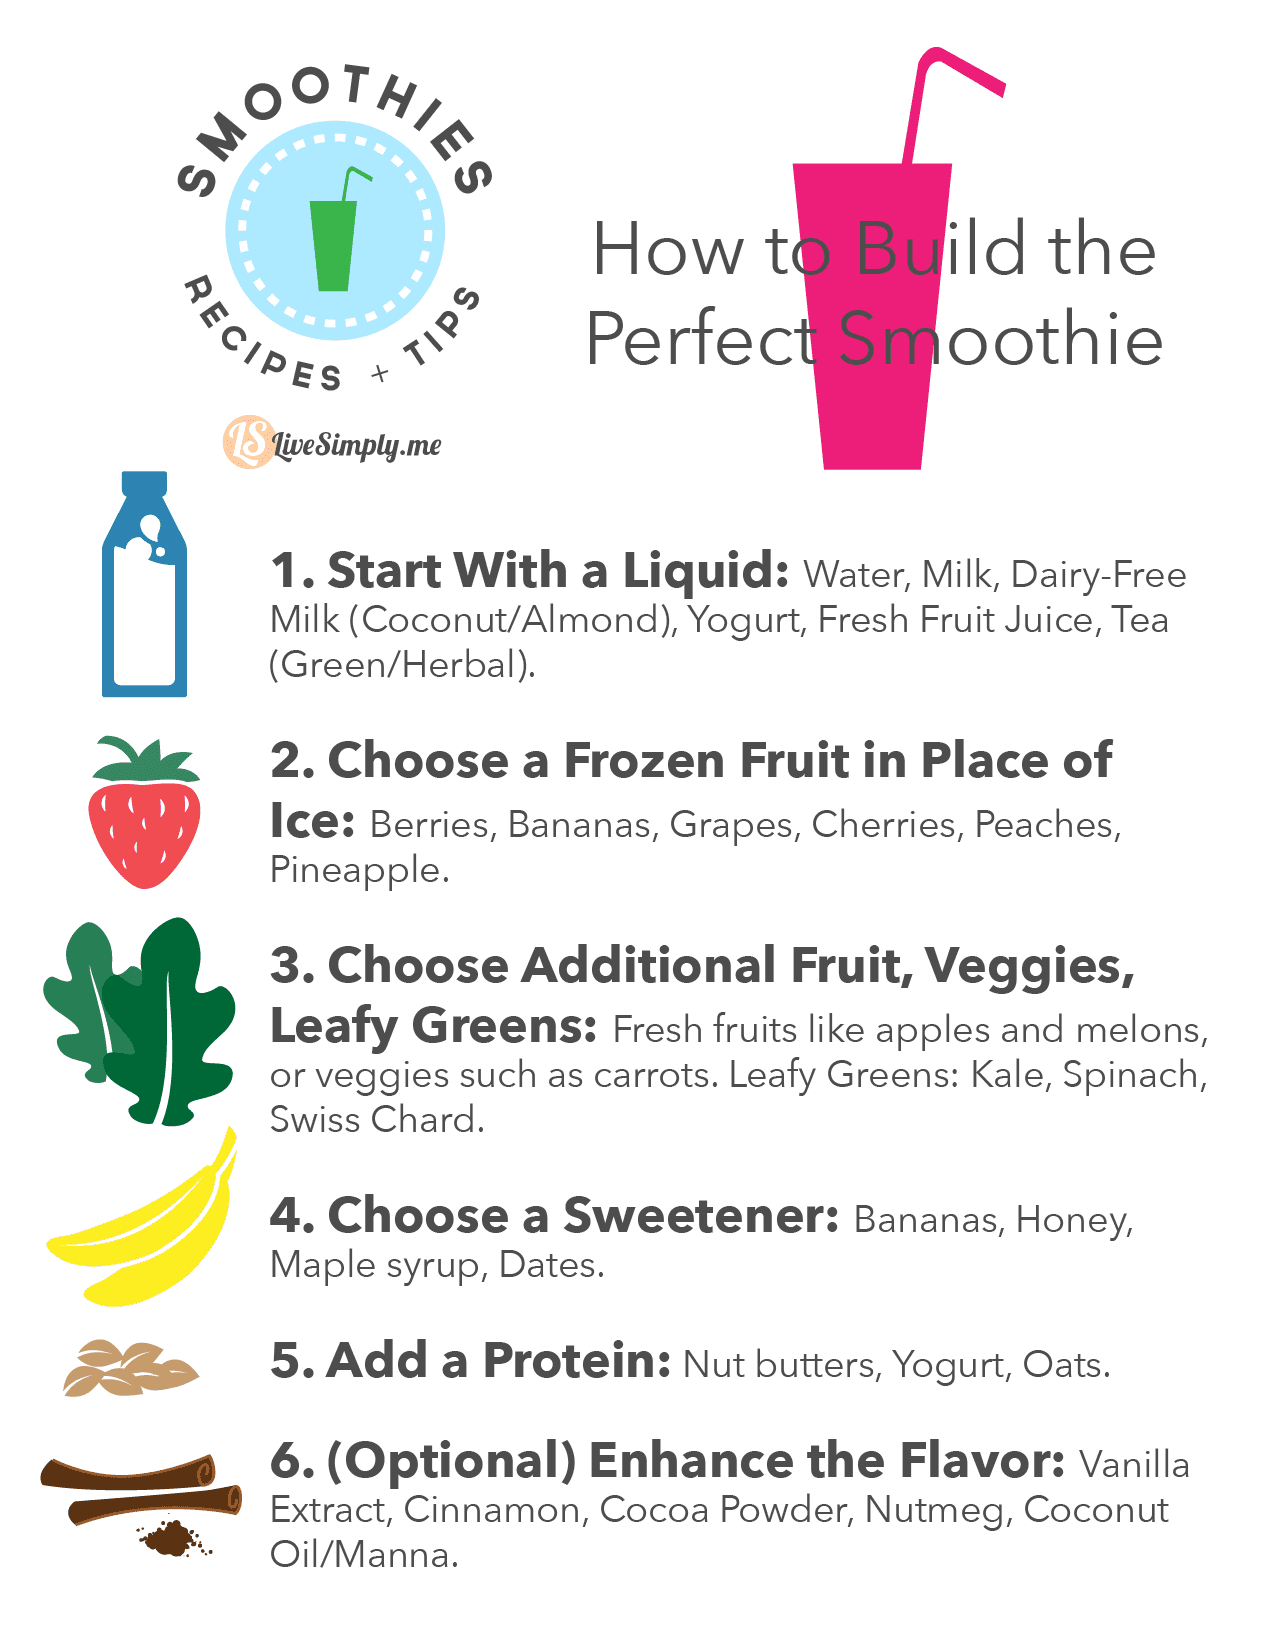 DIY Smoothies: How to Build the Perfect Smoothie